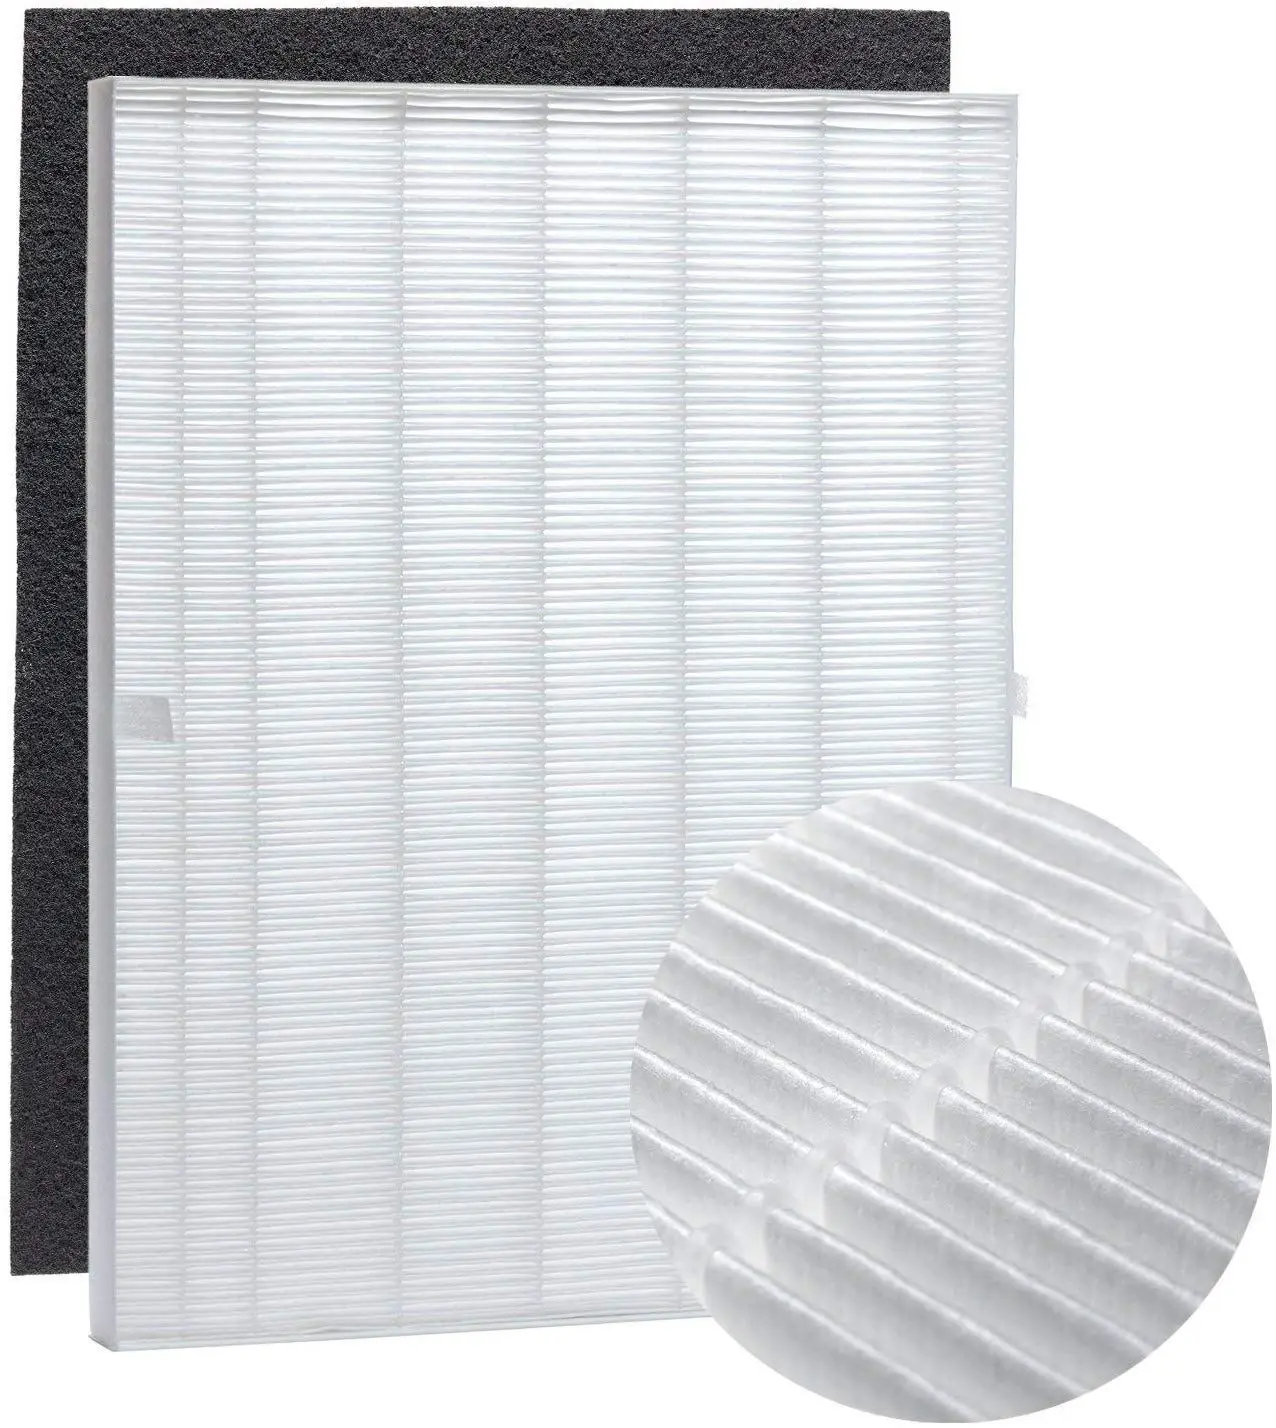 replacement   115115 Replacement Filter A for C535  5300-2  P300 5300 air purifier hepa filter